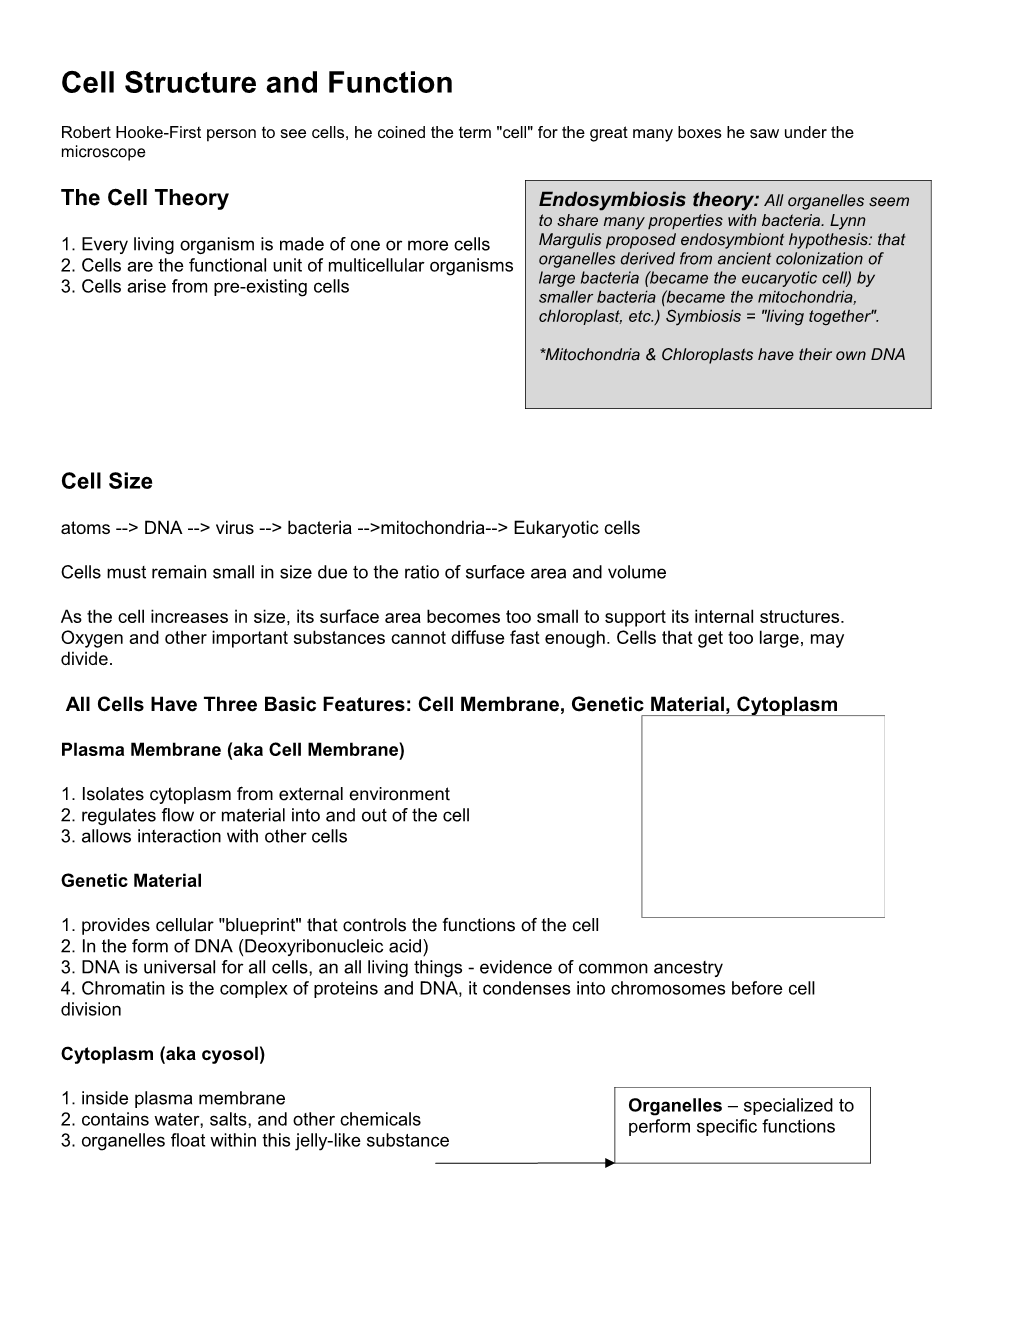 Biology 3A - Student Resources s1